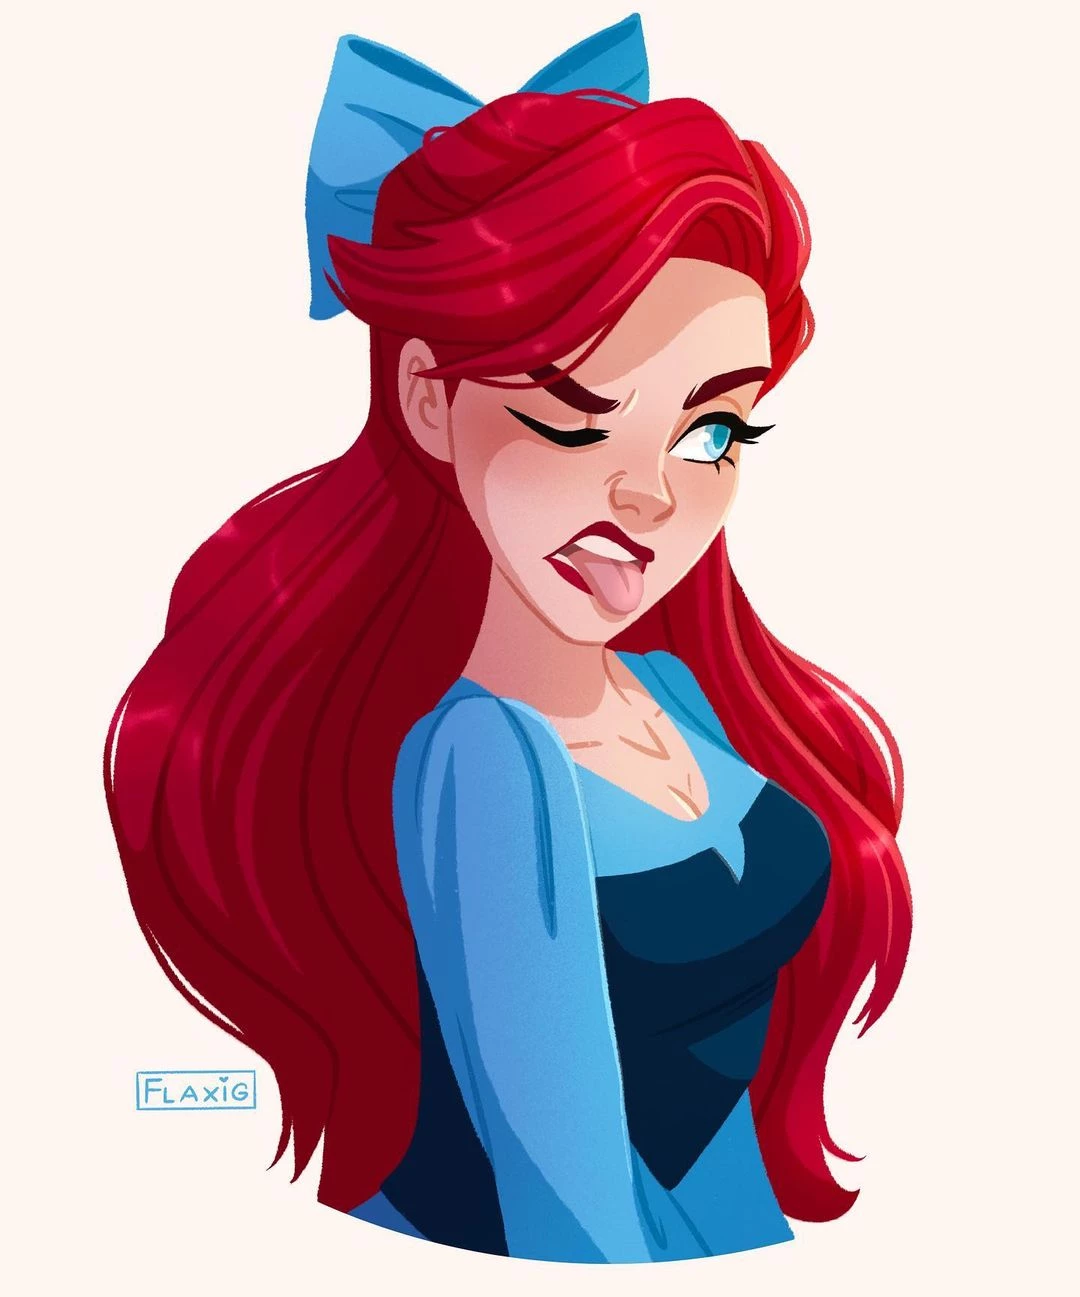 Animated Ariel’s Disgusted Face (The Little Mermaid)